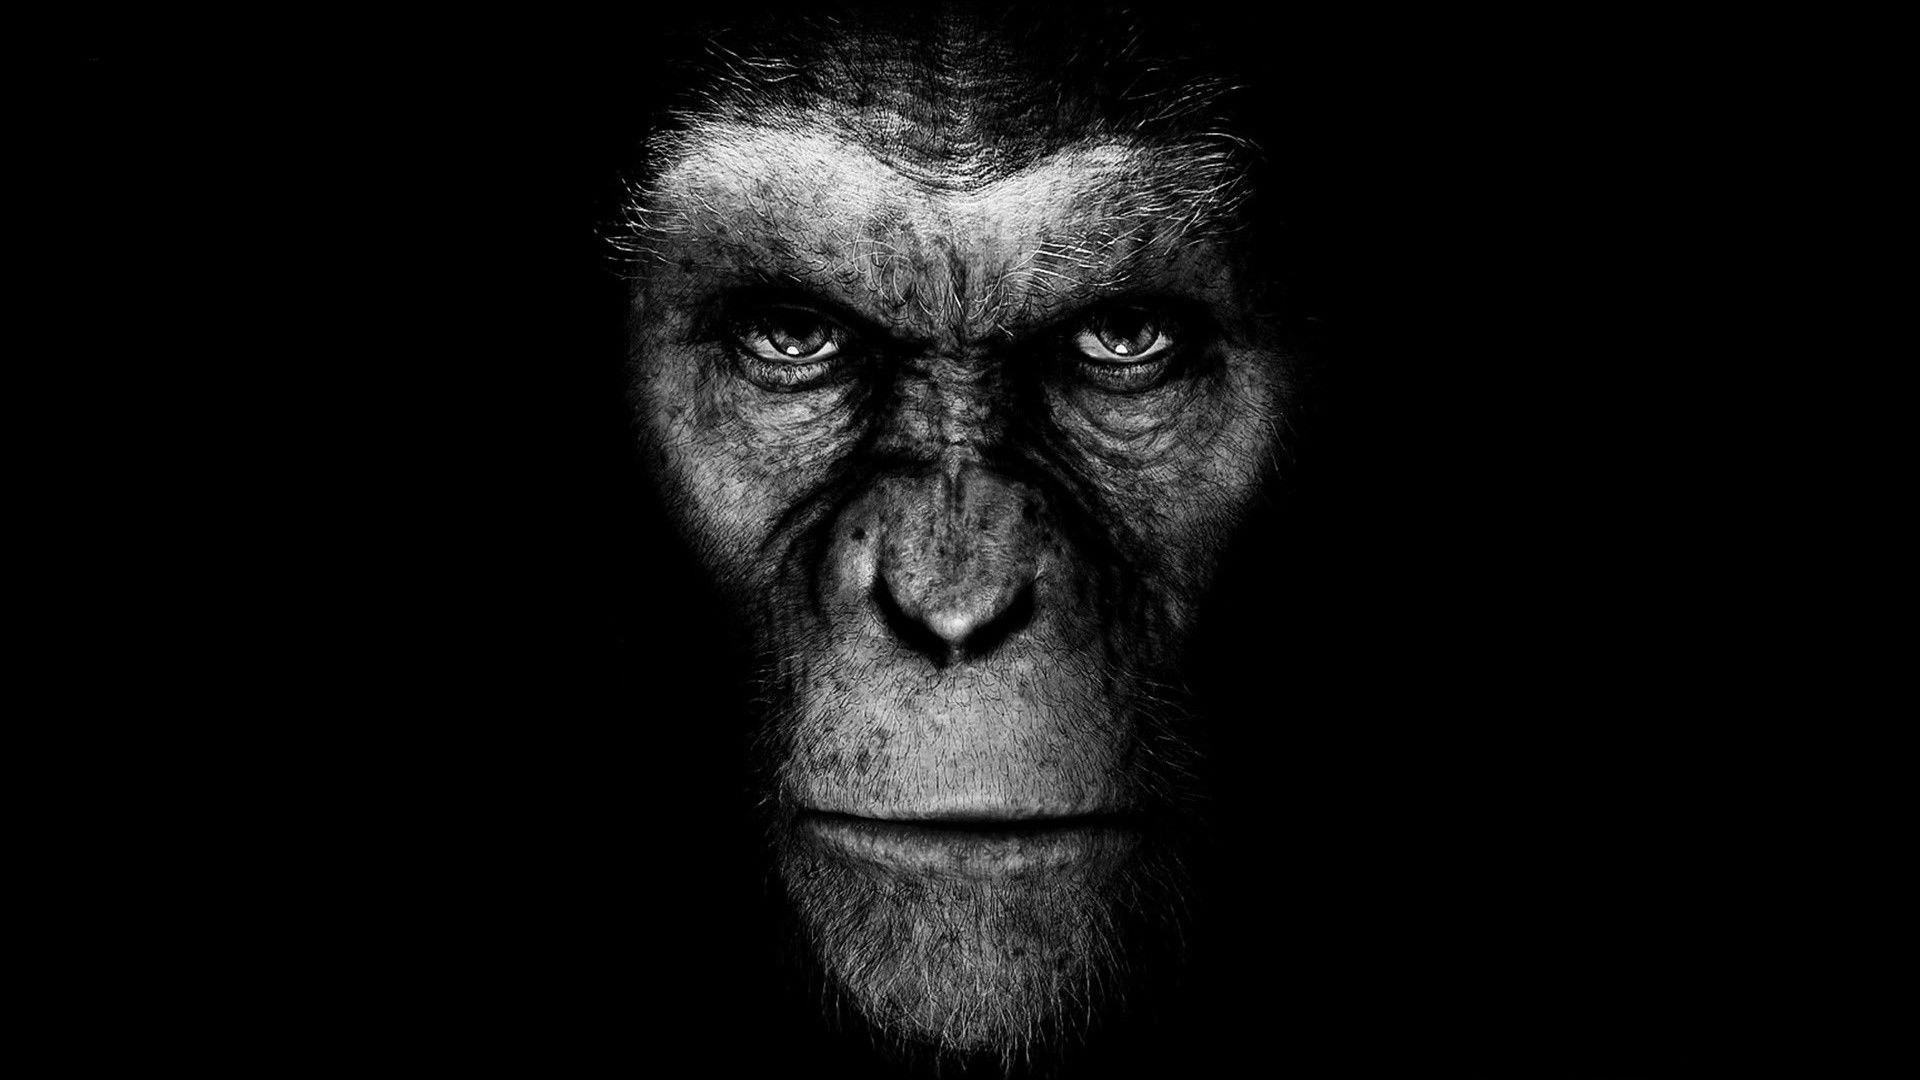 Planet Of The Apes, Movies, Artwork Wallpaper